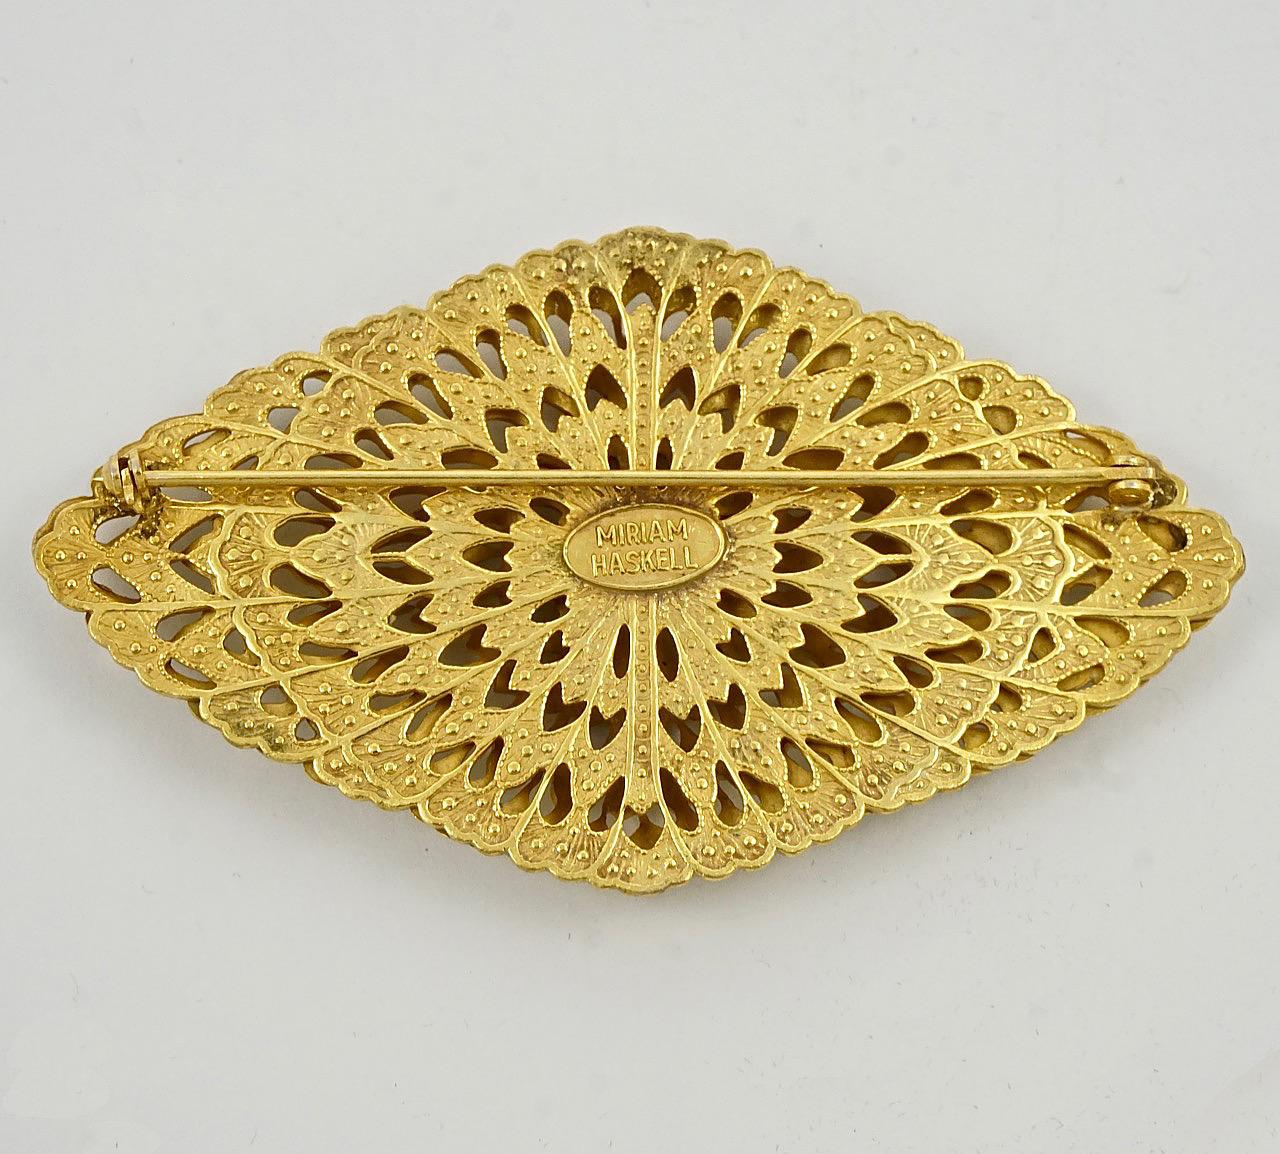 Miriam Haskell beautiful Russian gold plated ornate diamond shaped brooch, with four domes. Measuring length 8.6 cm / 3.3 inches by width 4.8 cm / 1.9 inches. The brooch is in very good condition.

This is a wonderful intricate brooch with the